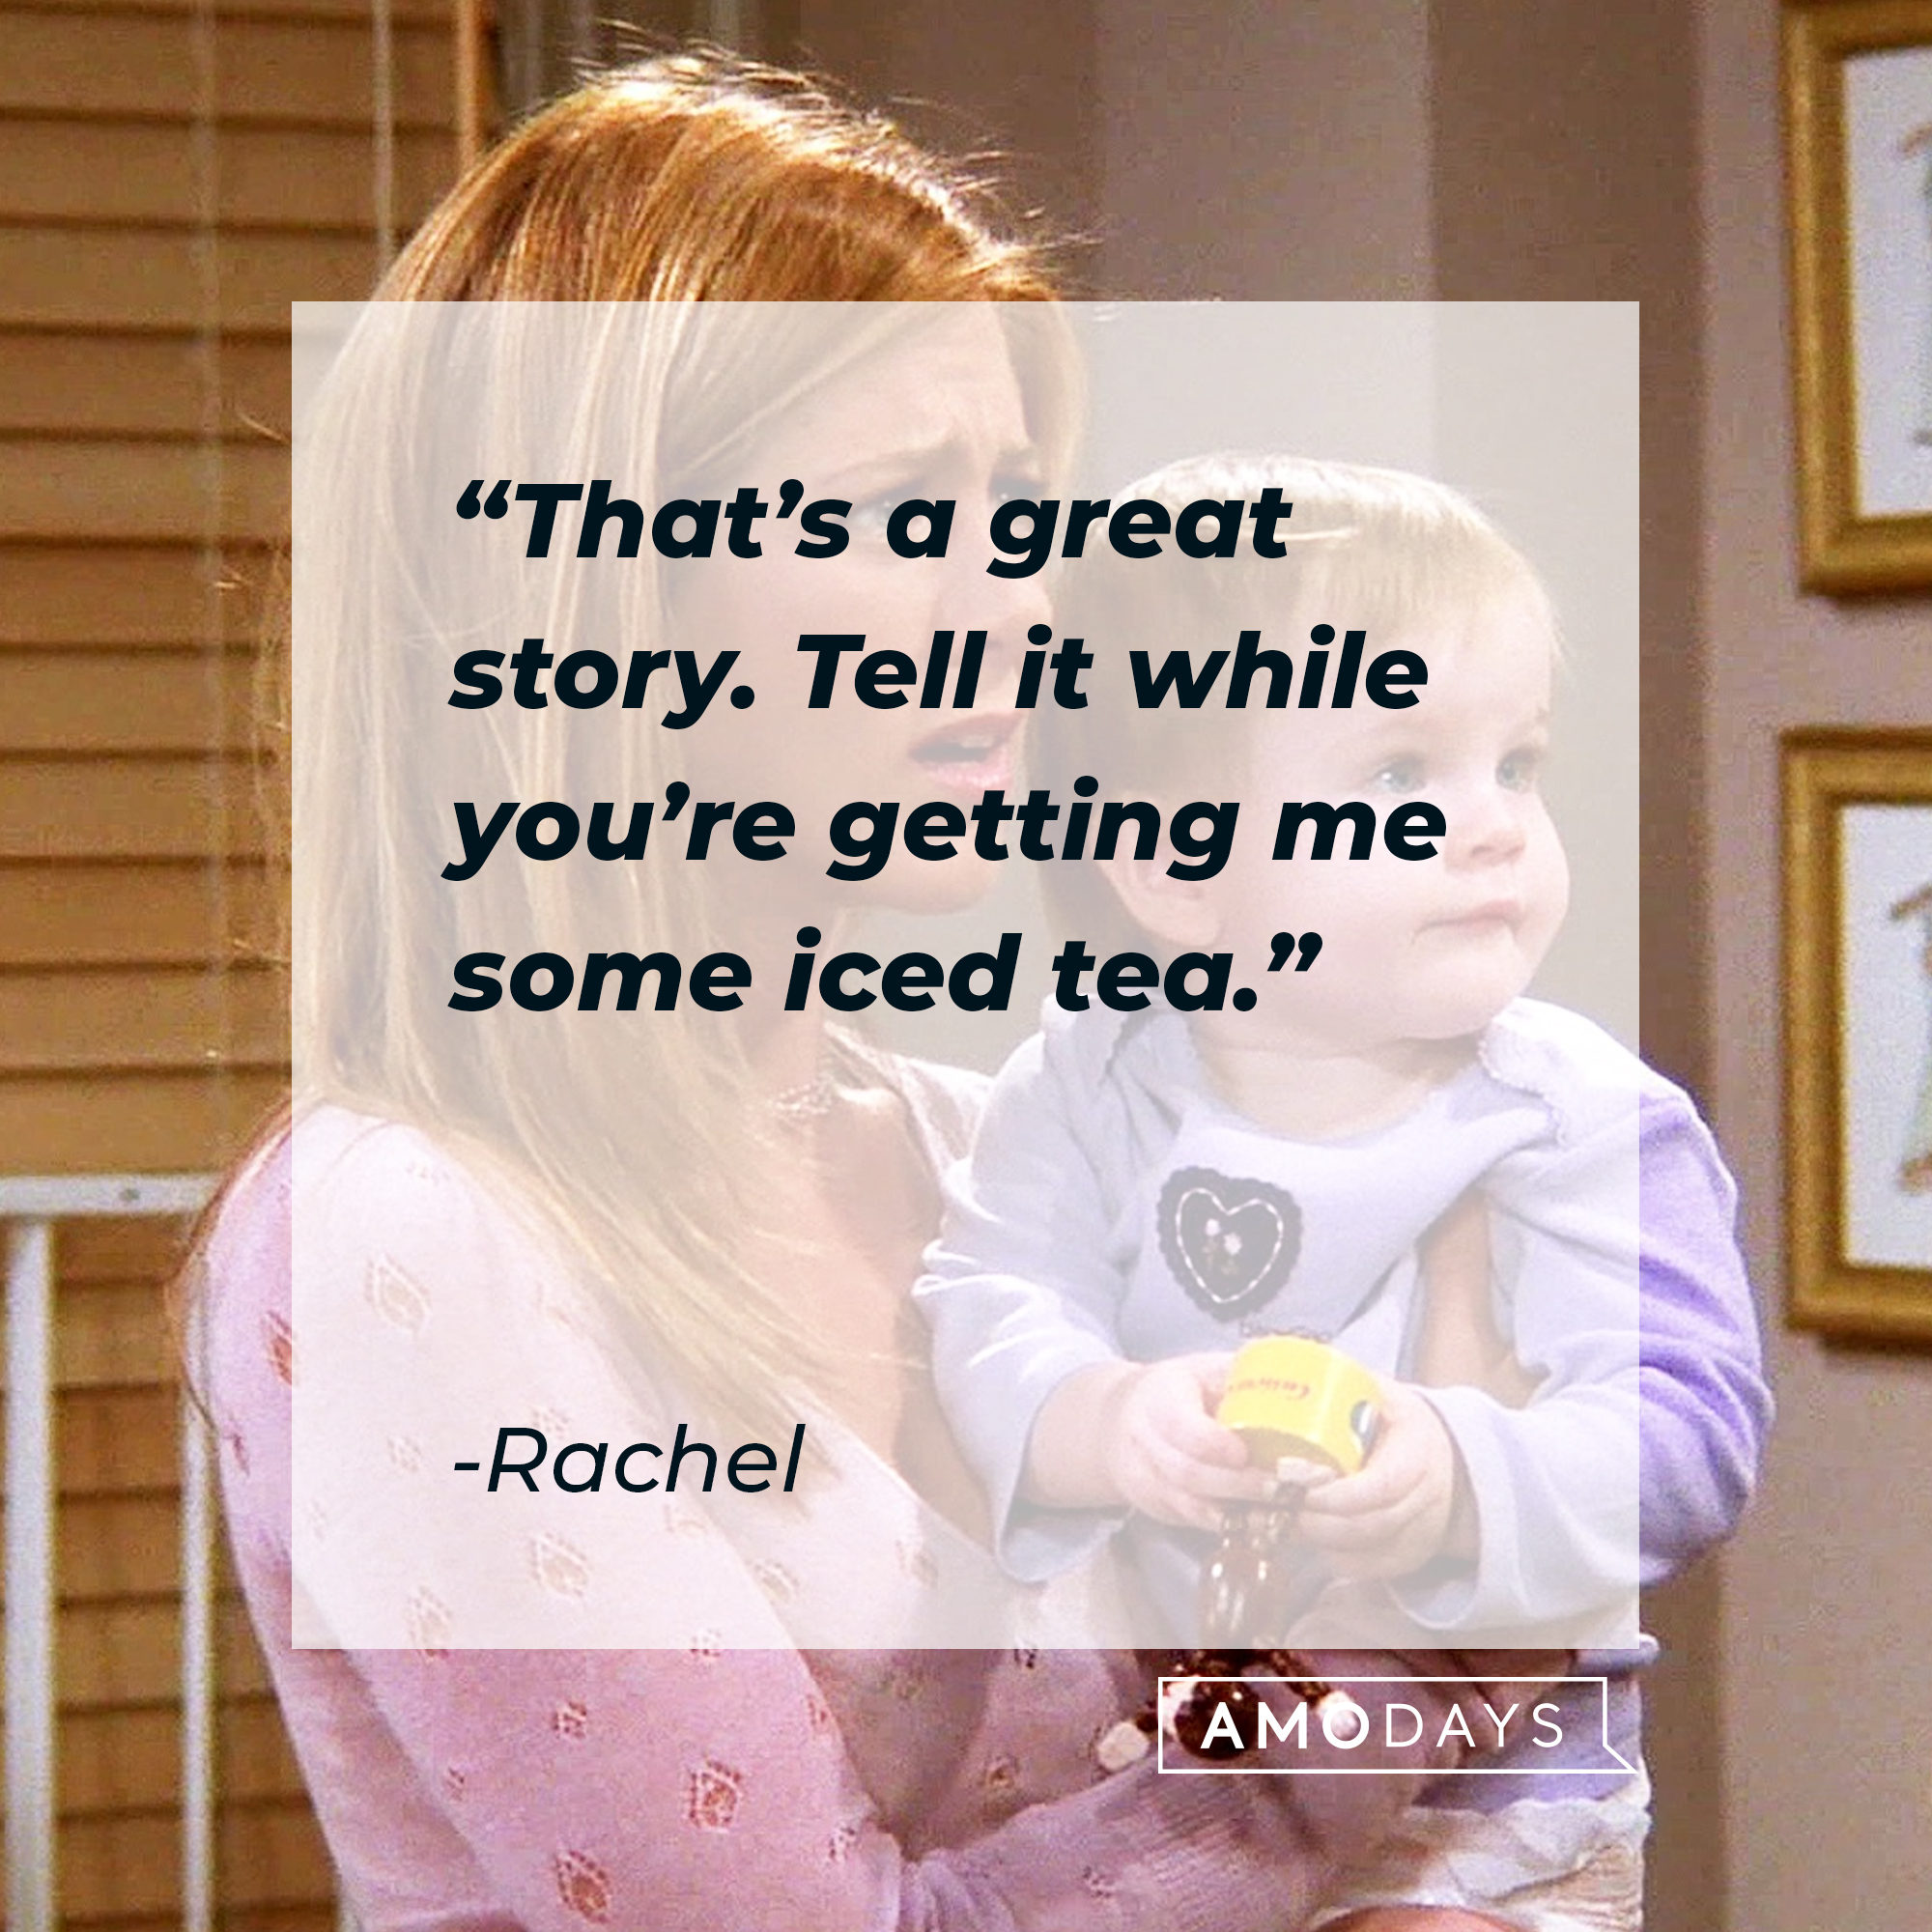 Rachel's quote: “That’s a great story. Tell it while you’re getting me some iced tea.” | Source: facebook.com/friends.tv